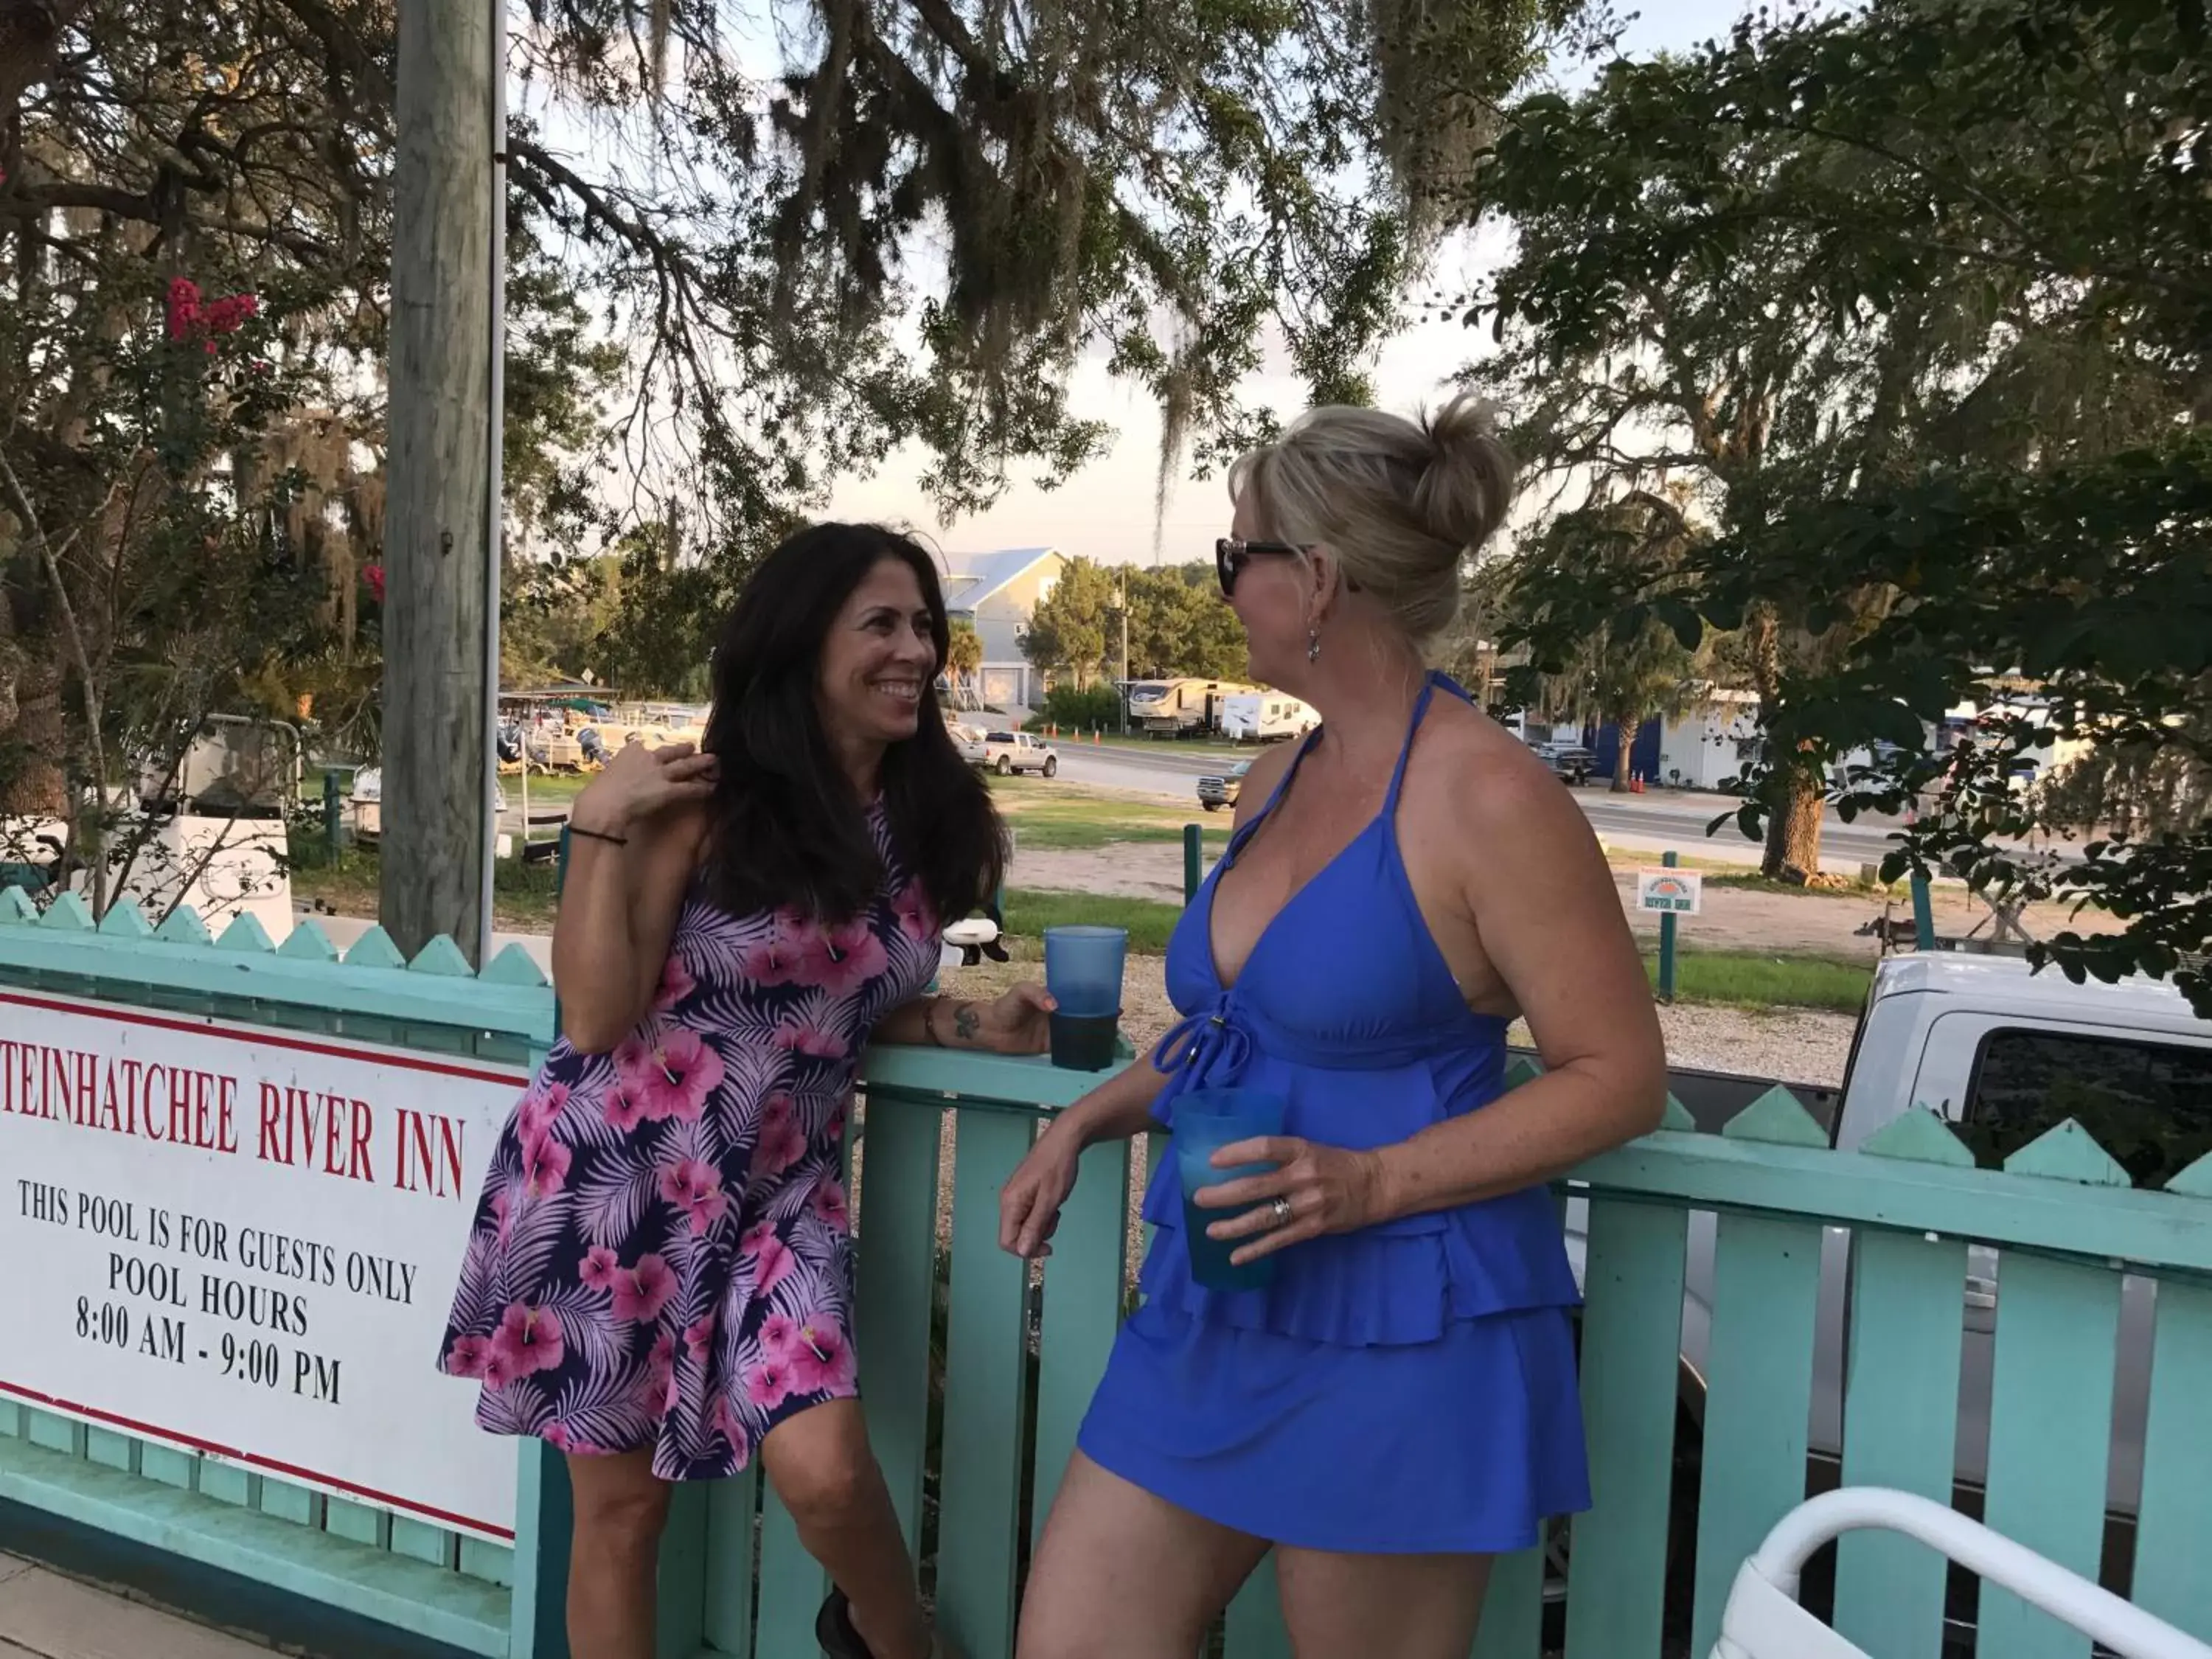 People in Steinhatchee River Inn and Marina